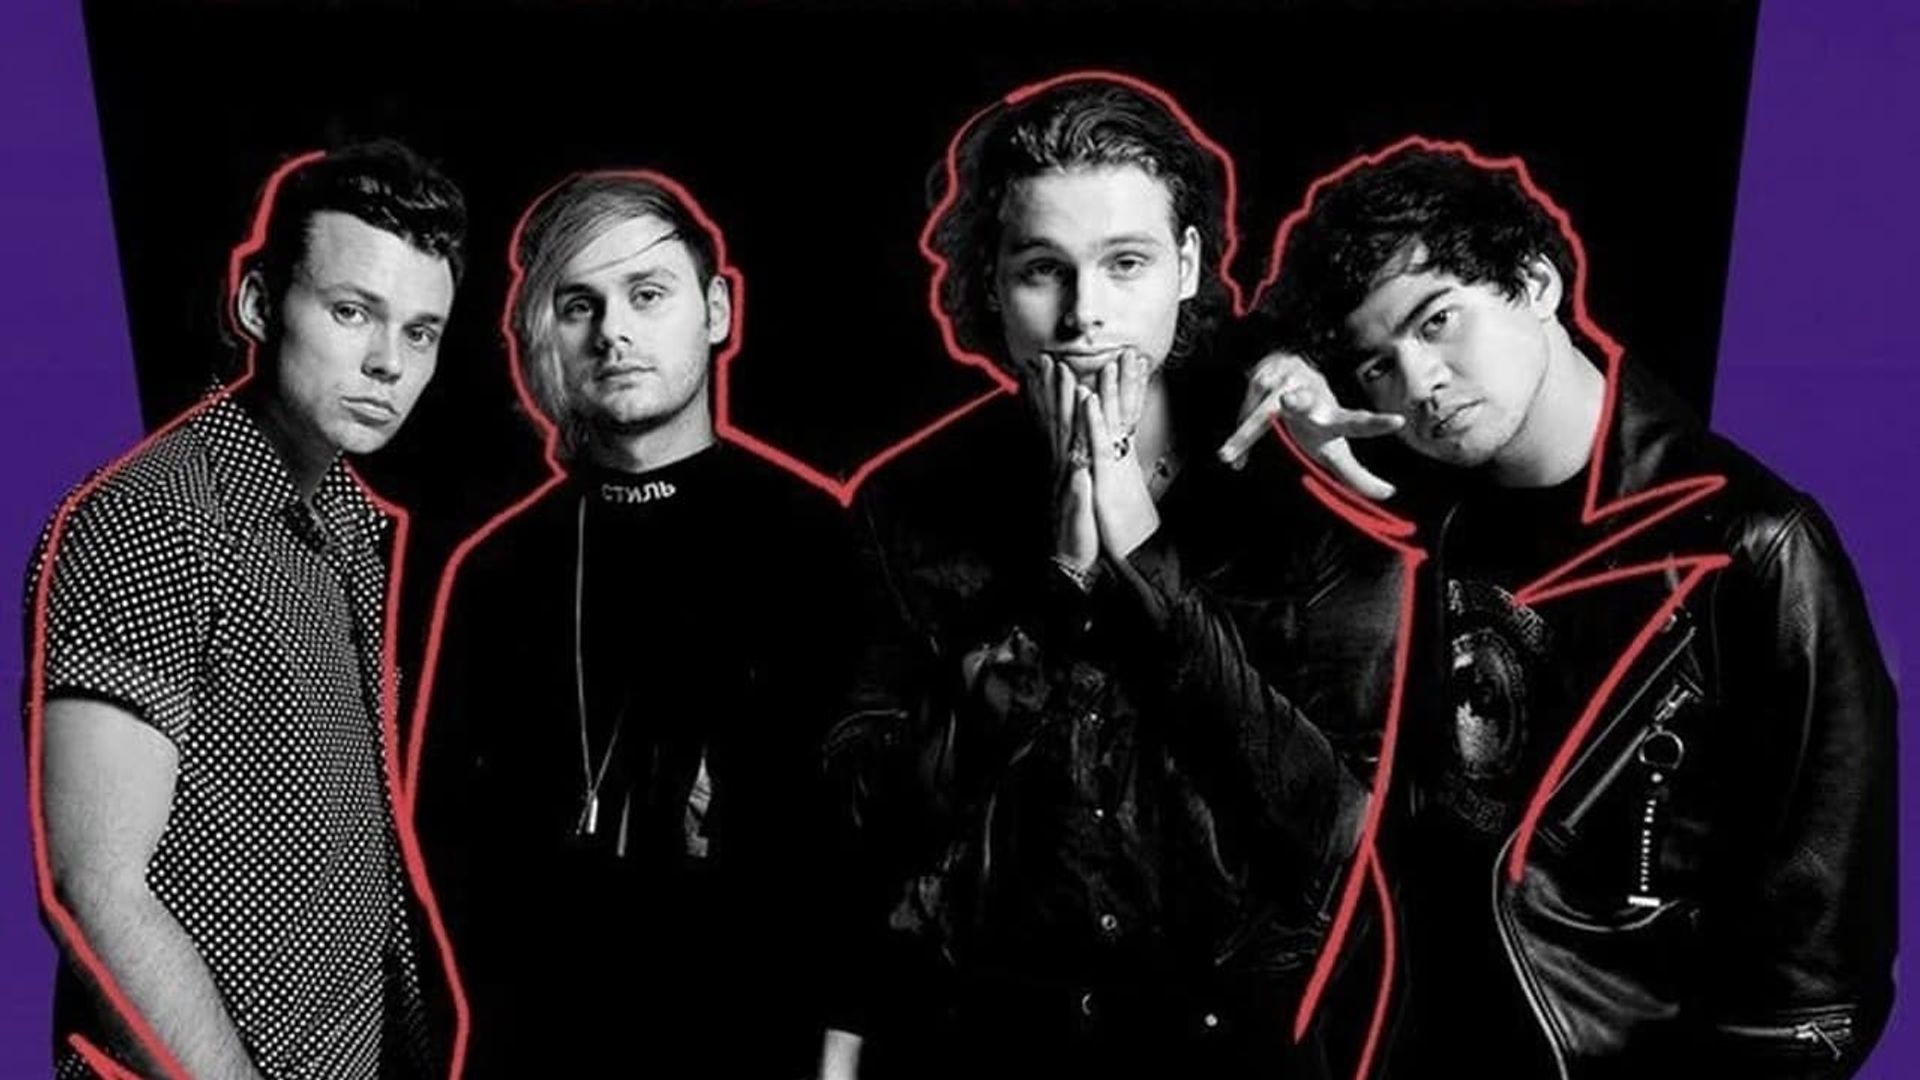 On the Record: 5 Seconds of Summer - Youngblood background